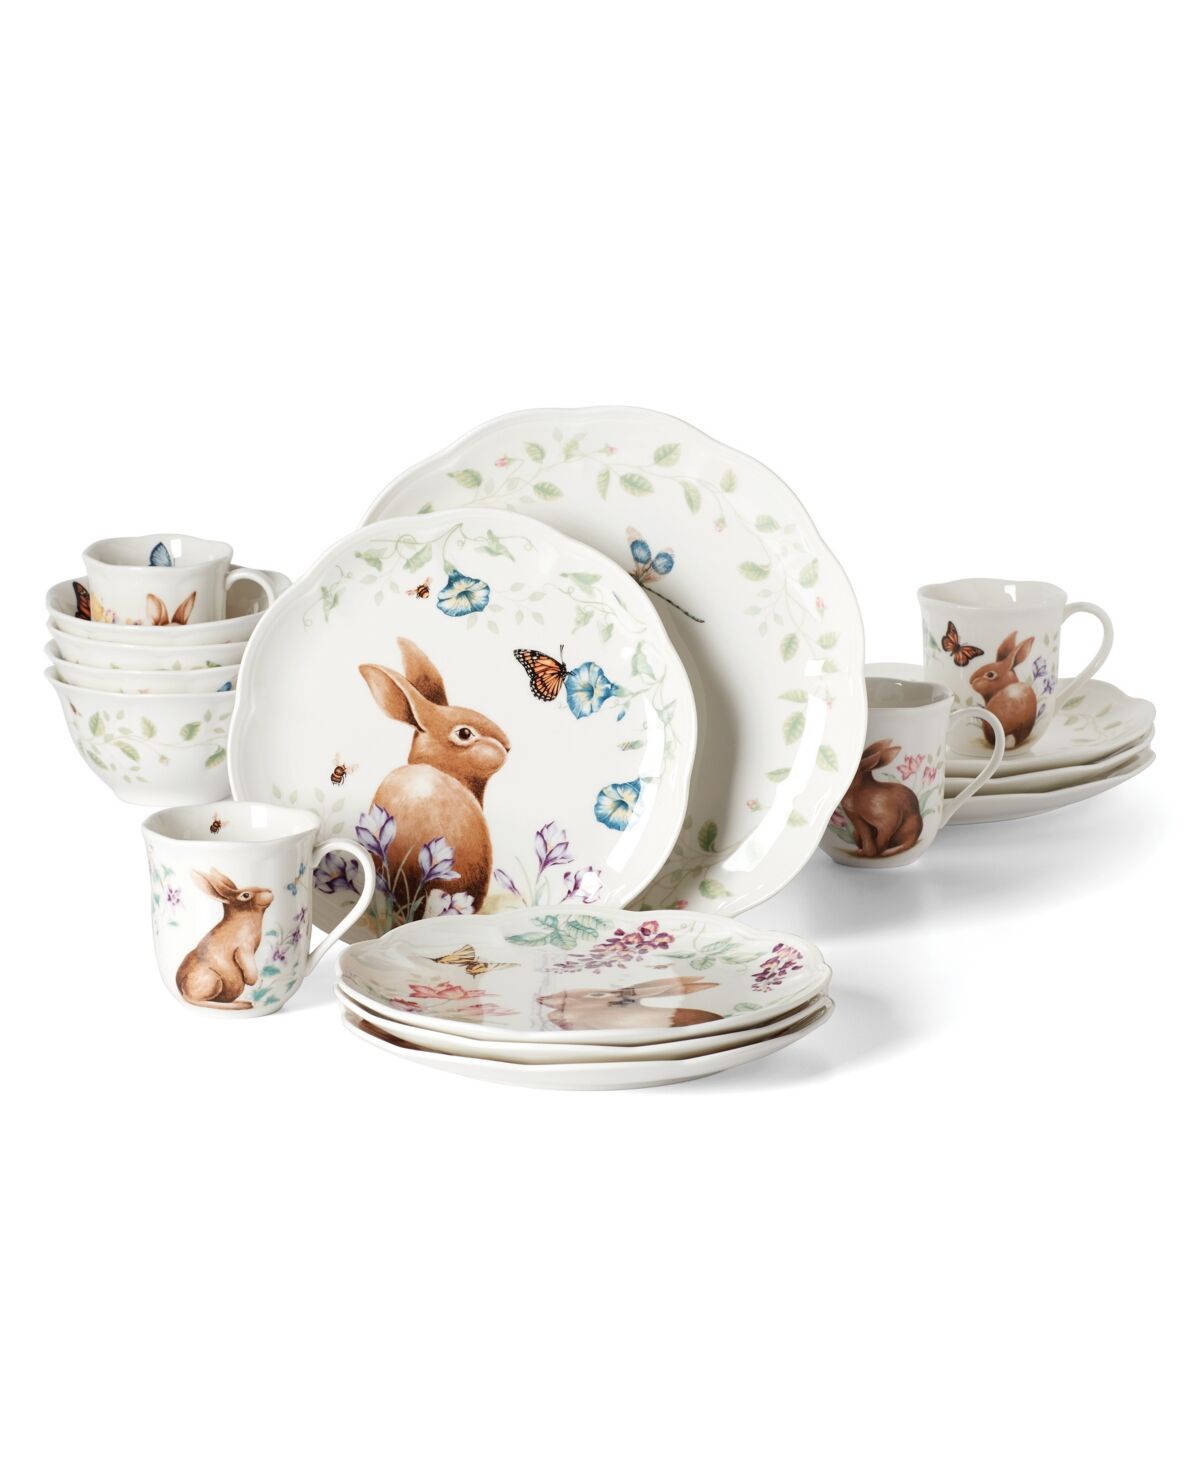 Lenox Butterfly Meadow Bunny Dinnerware Set, 16 Piece - Multi and White